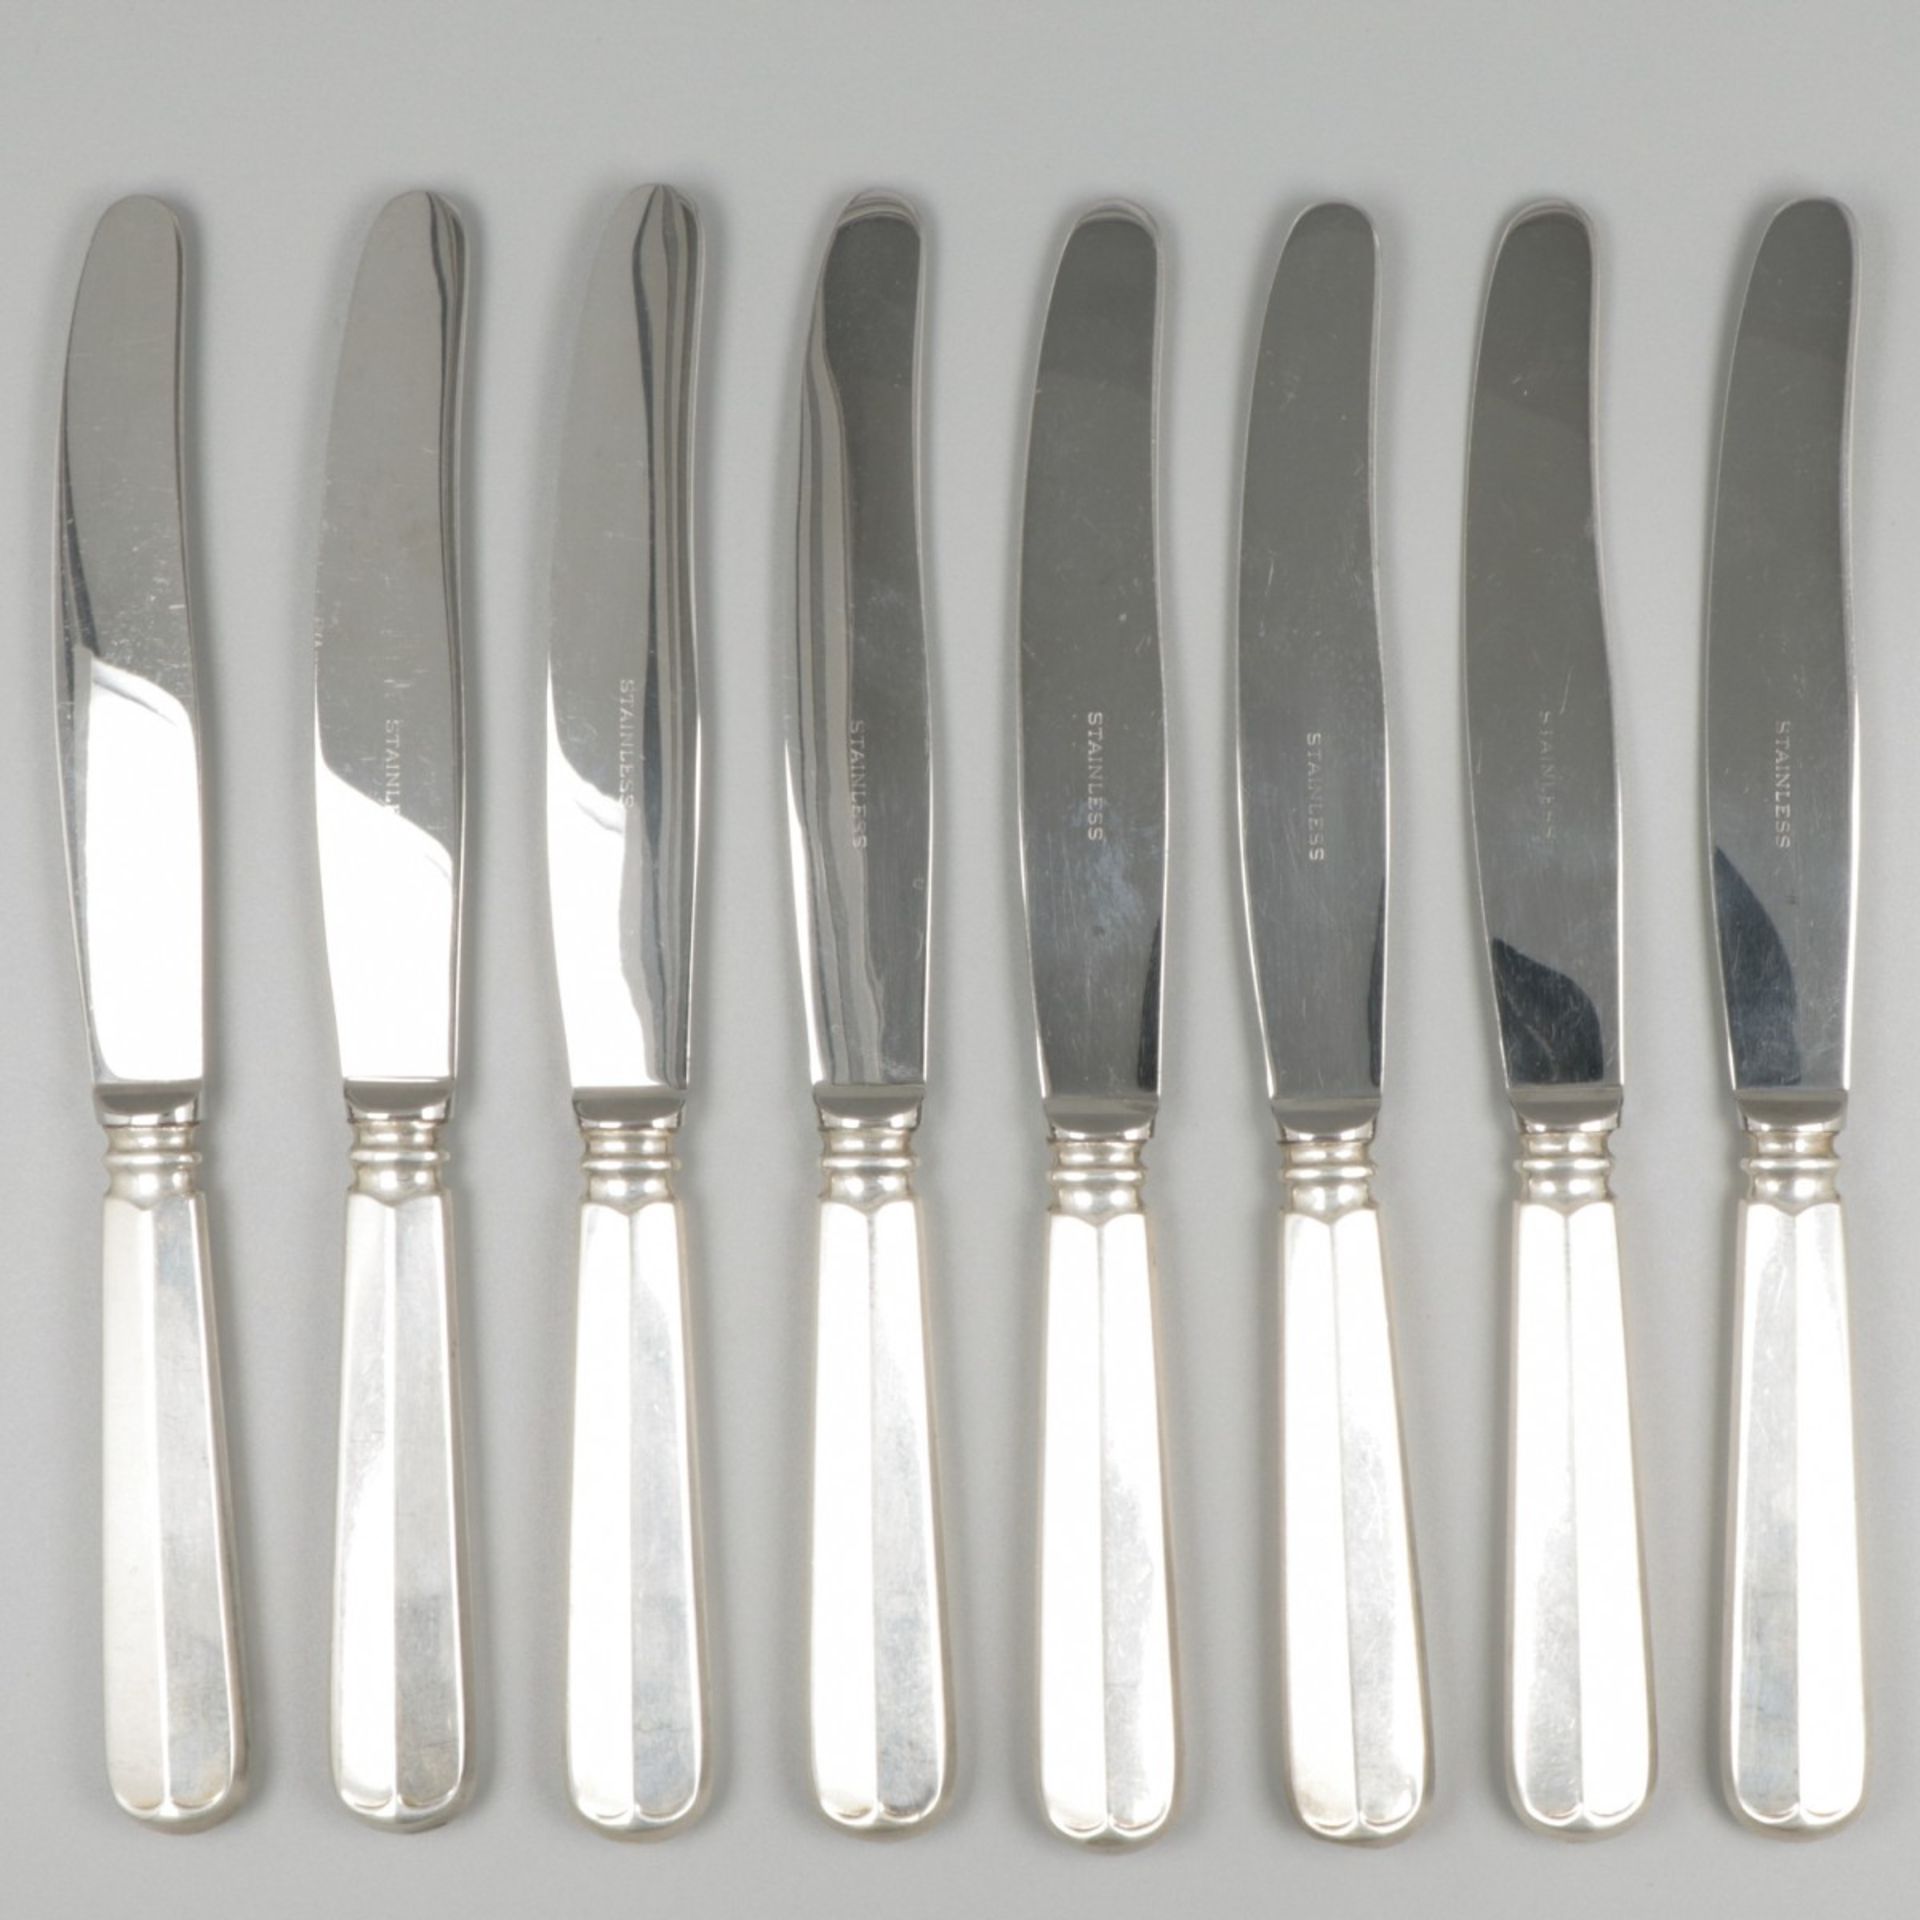 8-piece set of knives "Haags Lofje" silver. - Image 2 of 6